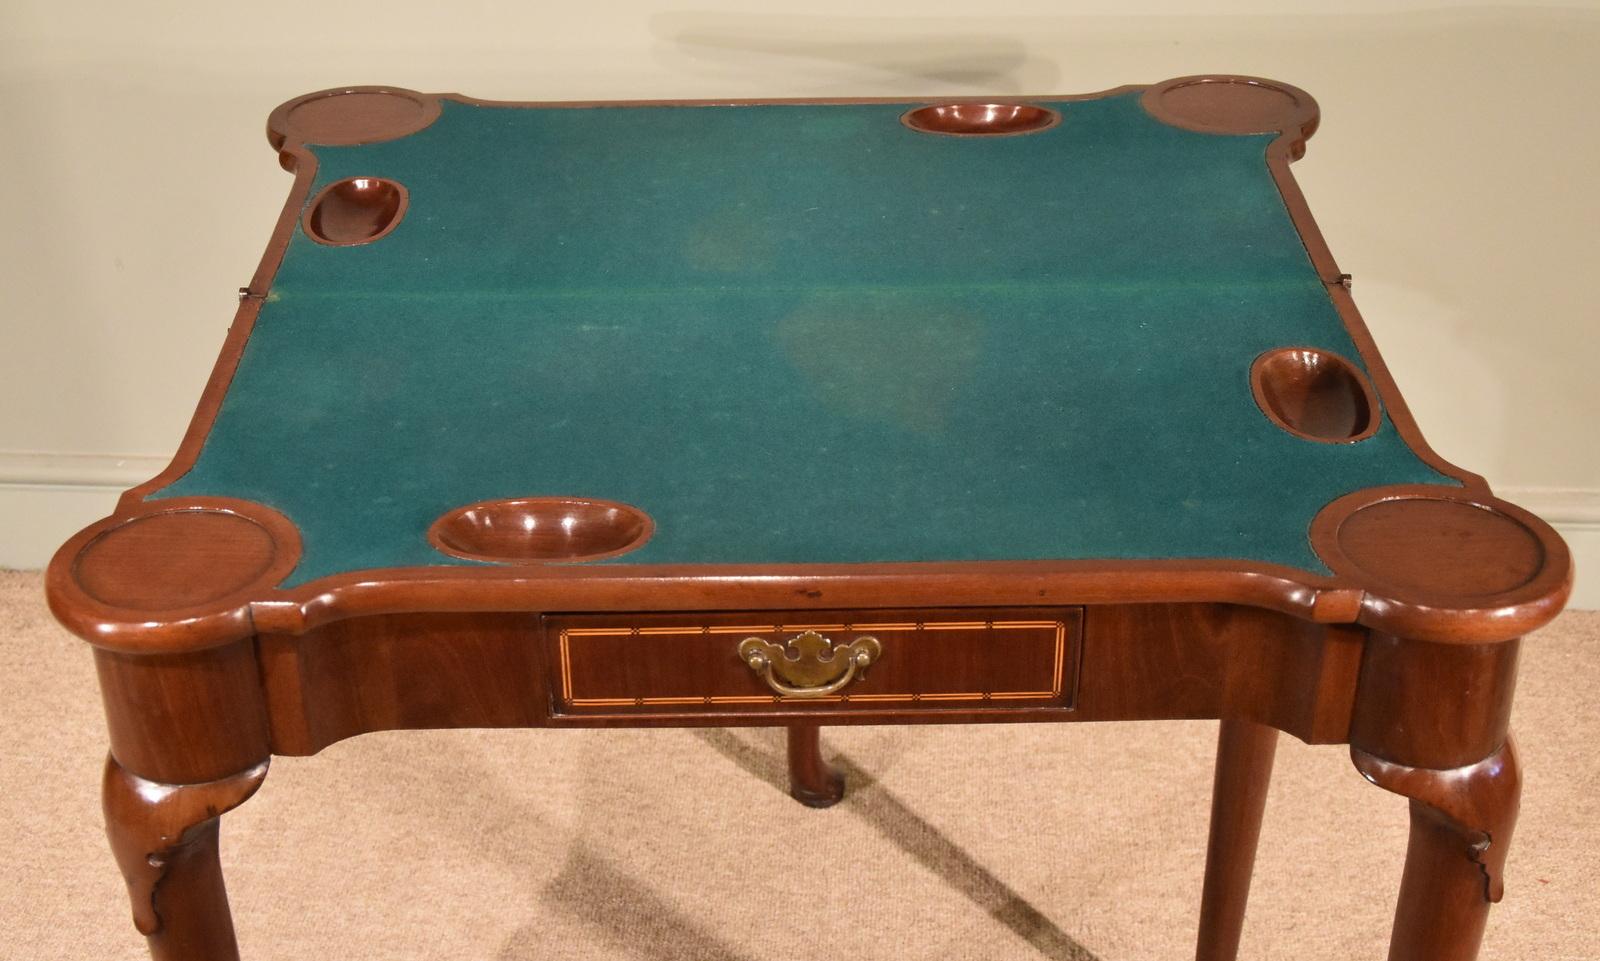 Fine Early 18th Century Inlaid Pad Foot Card Table In Good Condition For Sale In Wiltshire, GB